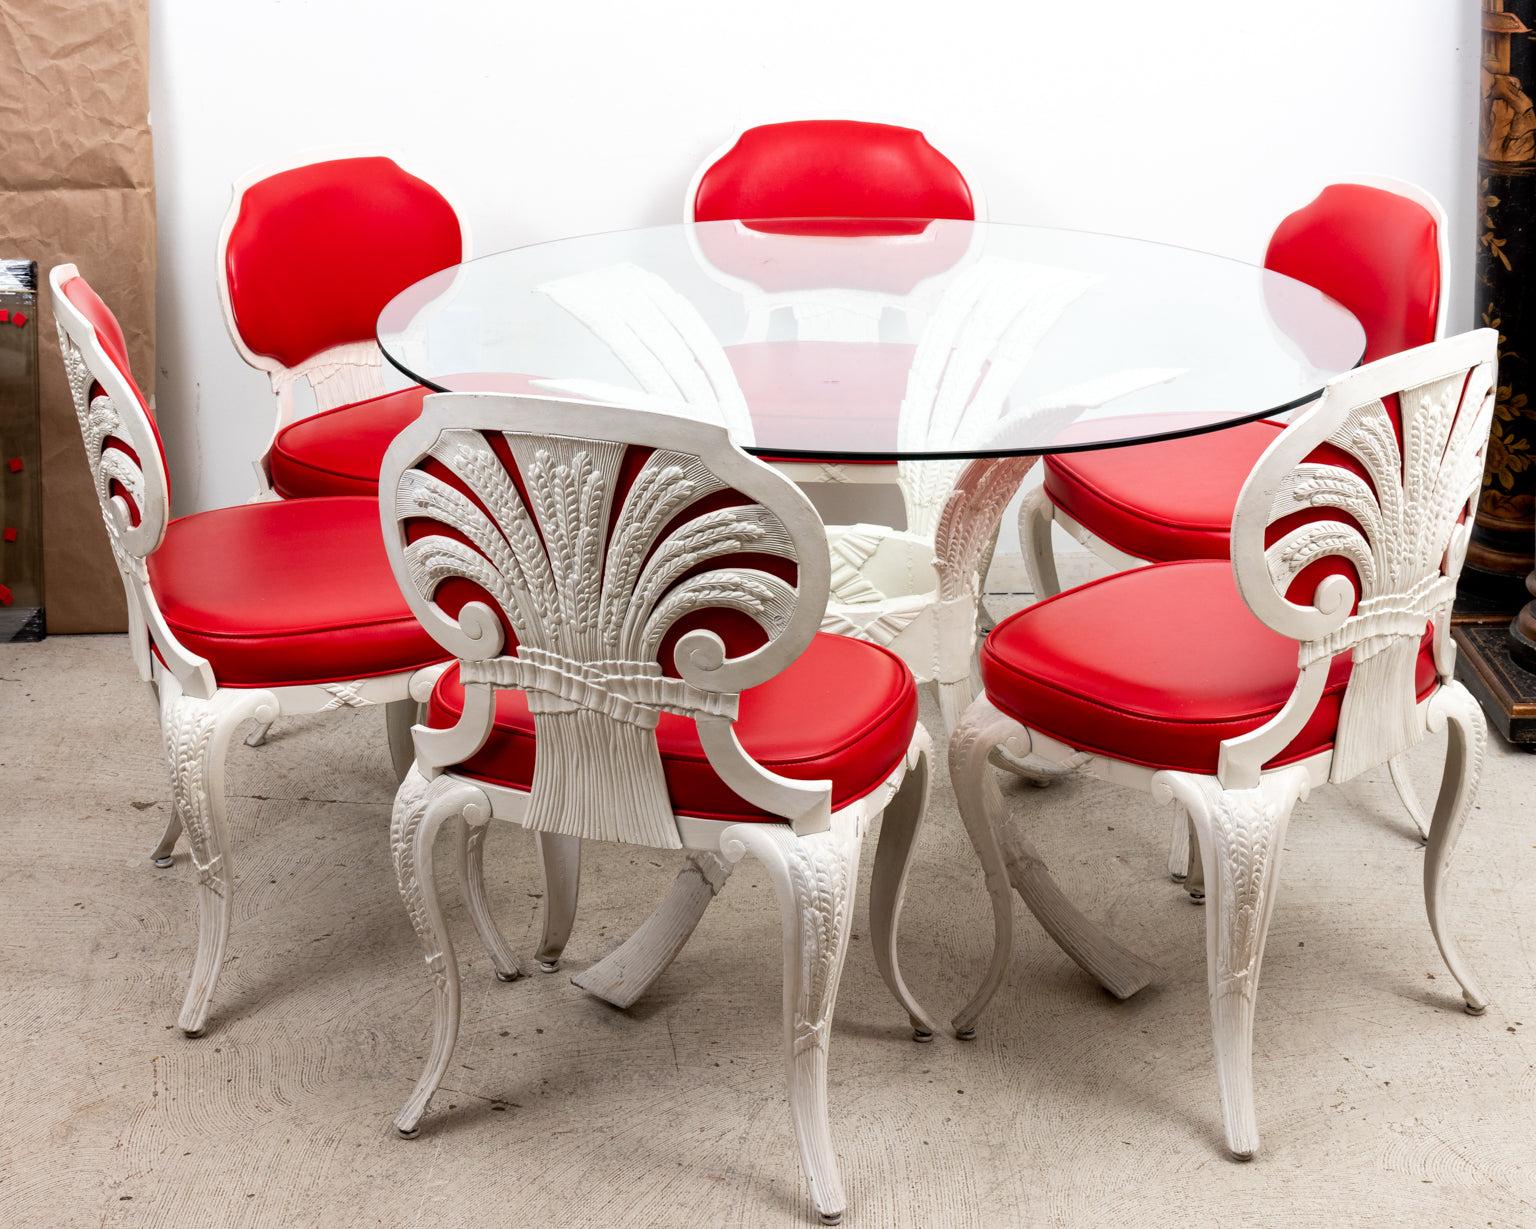 Hollywood Regency style round glass top table with set of six red upholstered chairs on cabriole legs. The table and chairs are constructed in white painted aluminum with ribbon motifs and bushels of wheat motifs as seen on the seat back of the